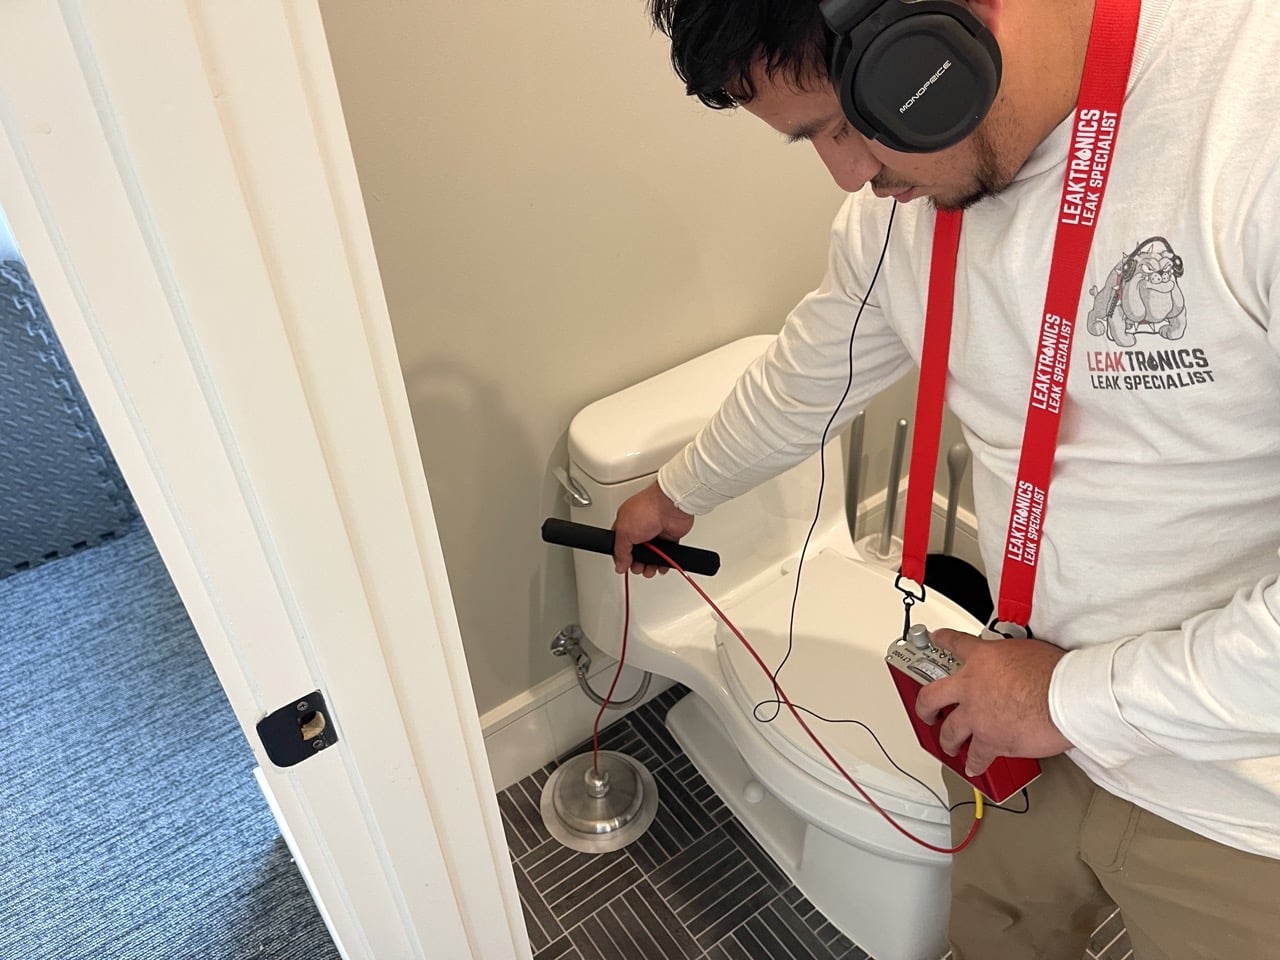 Tackling Plumbing Water Leaks with LeakTronics Before the Heat Hits